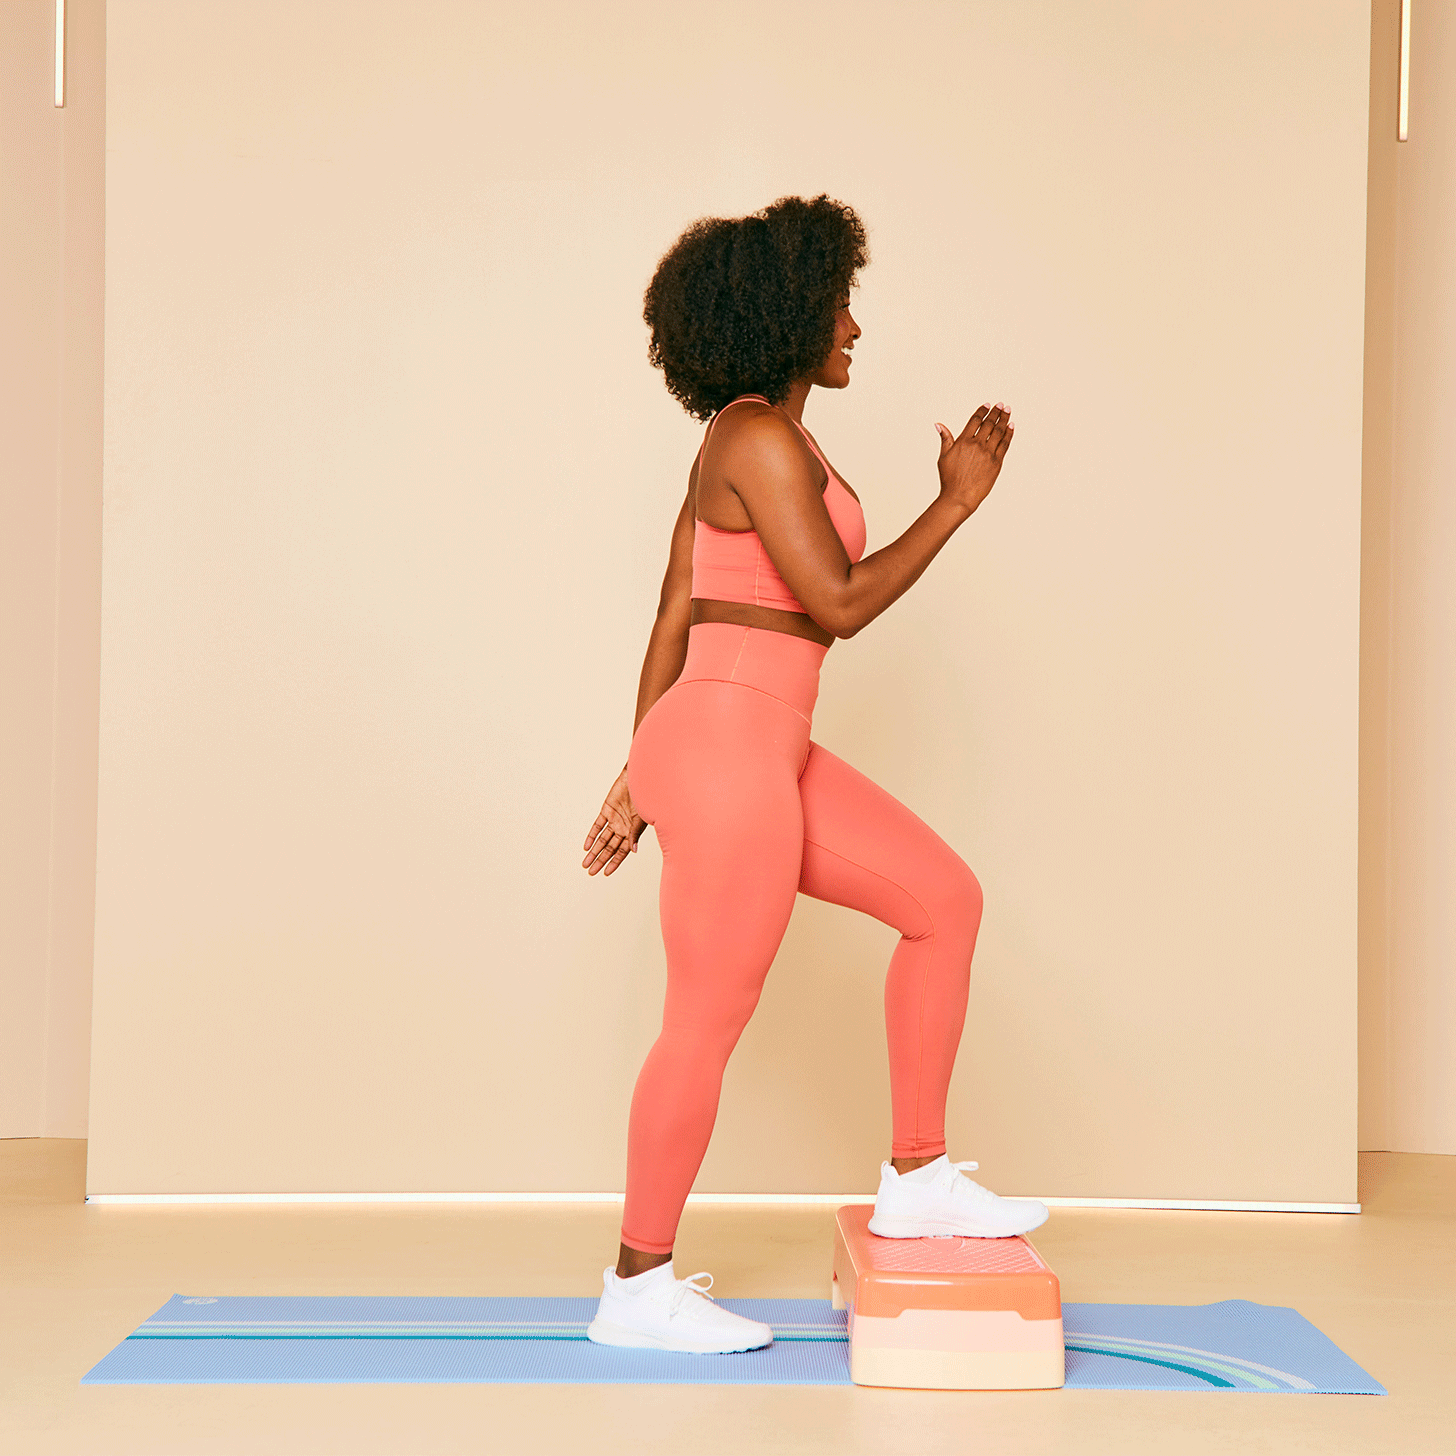 3 Pilates Moves For Balance That You Can Pretty Much Do Anywhere